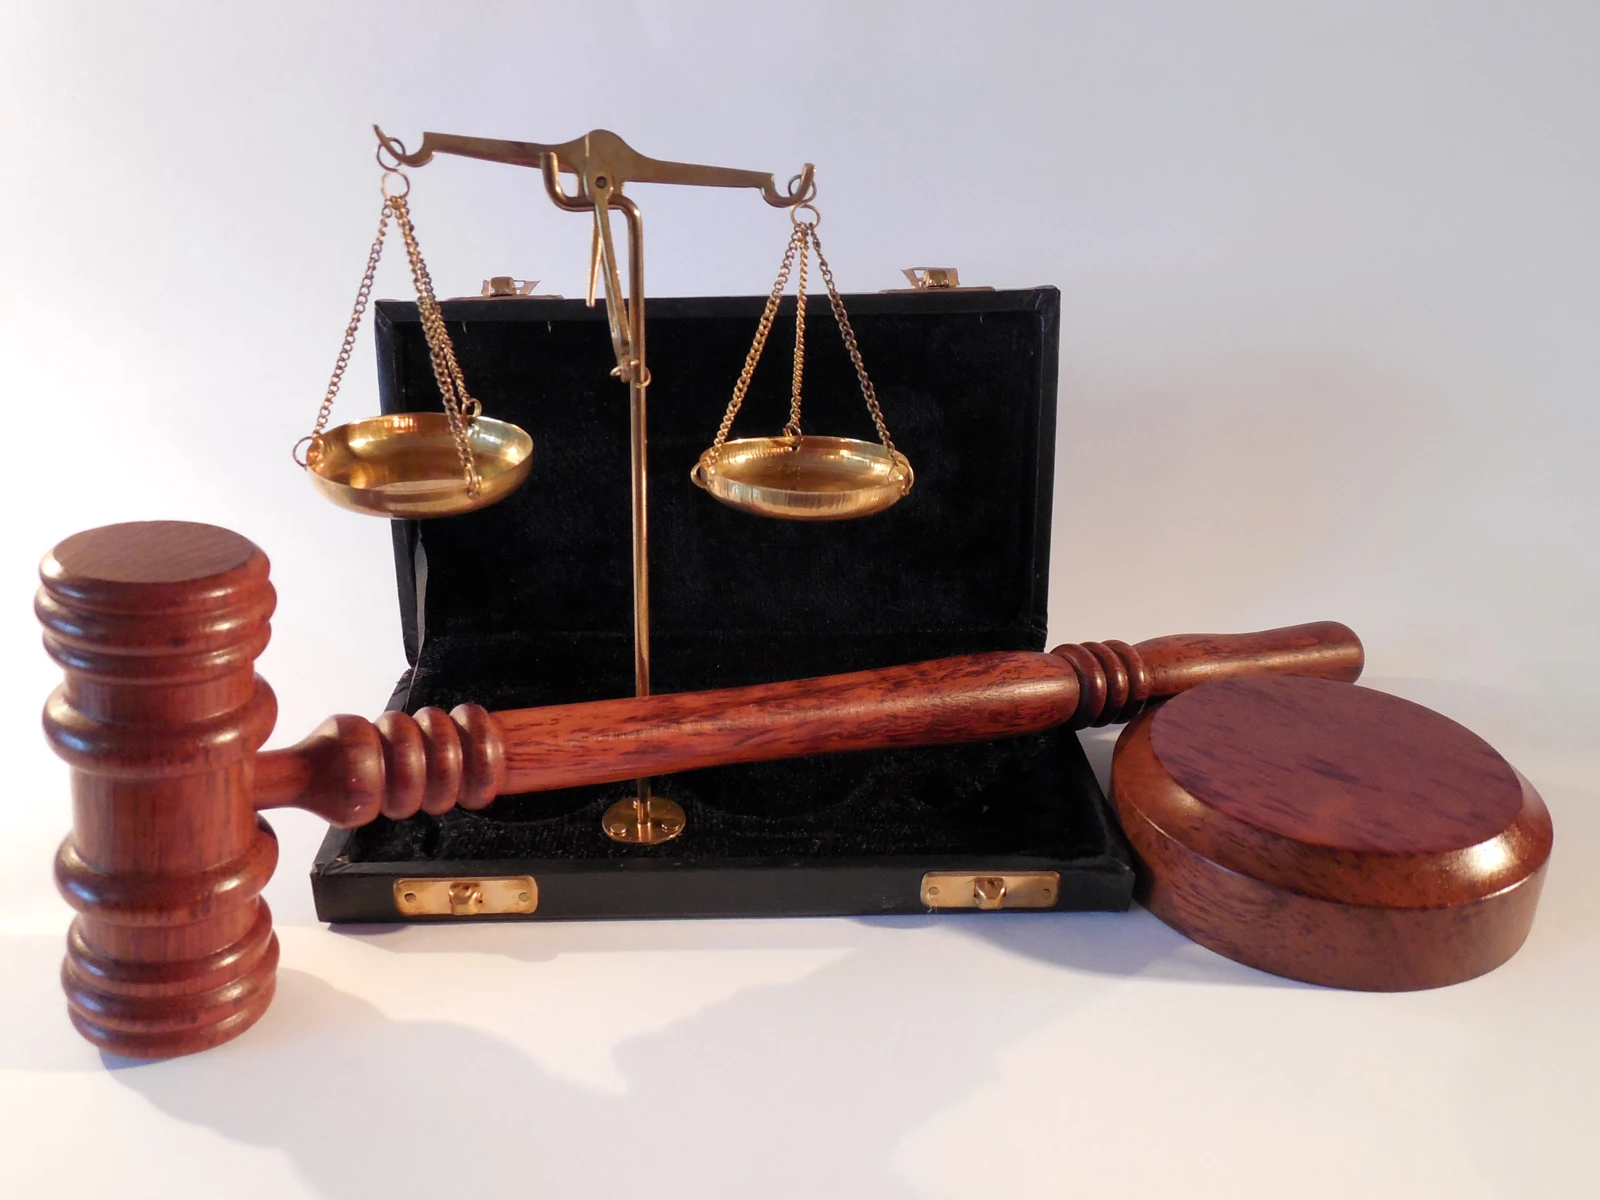 A set of scales and gavel on a table 